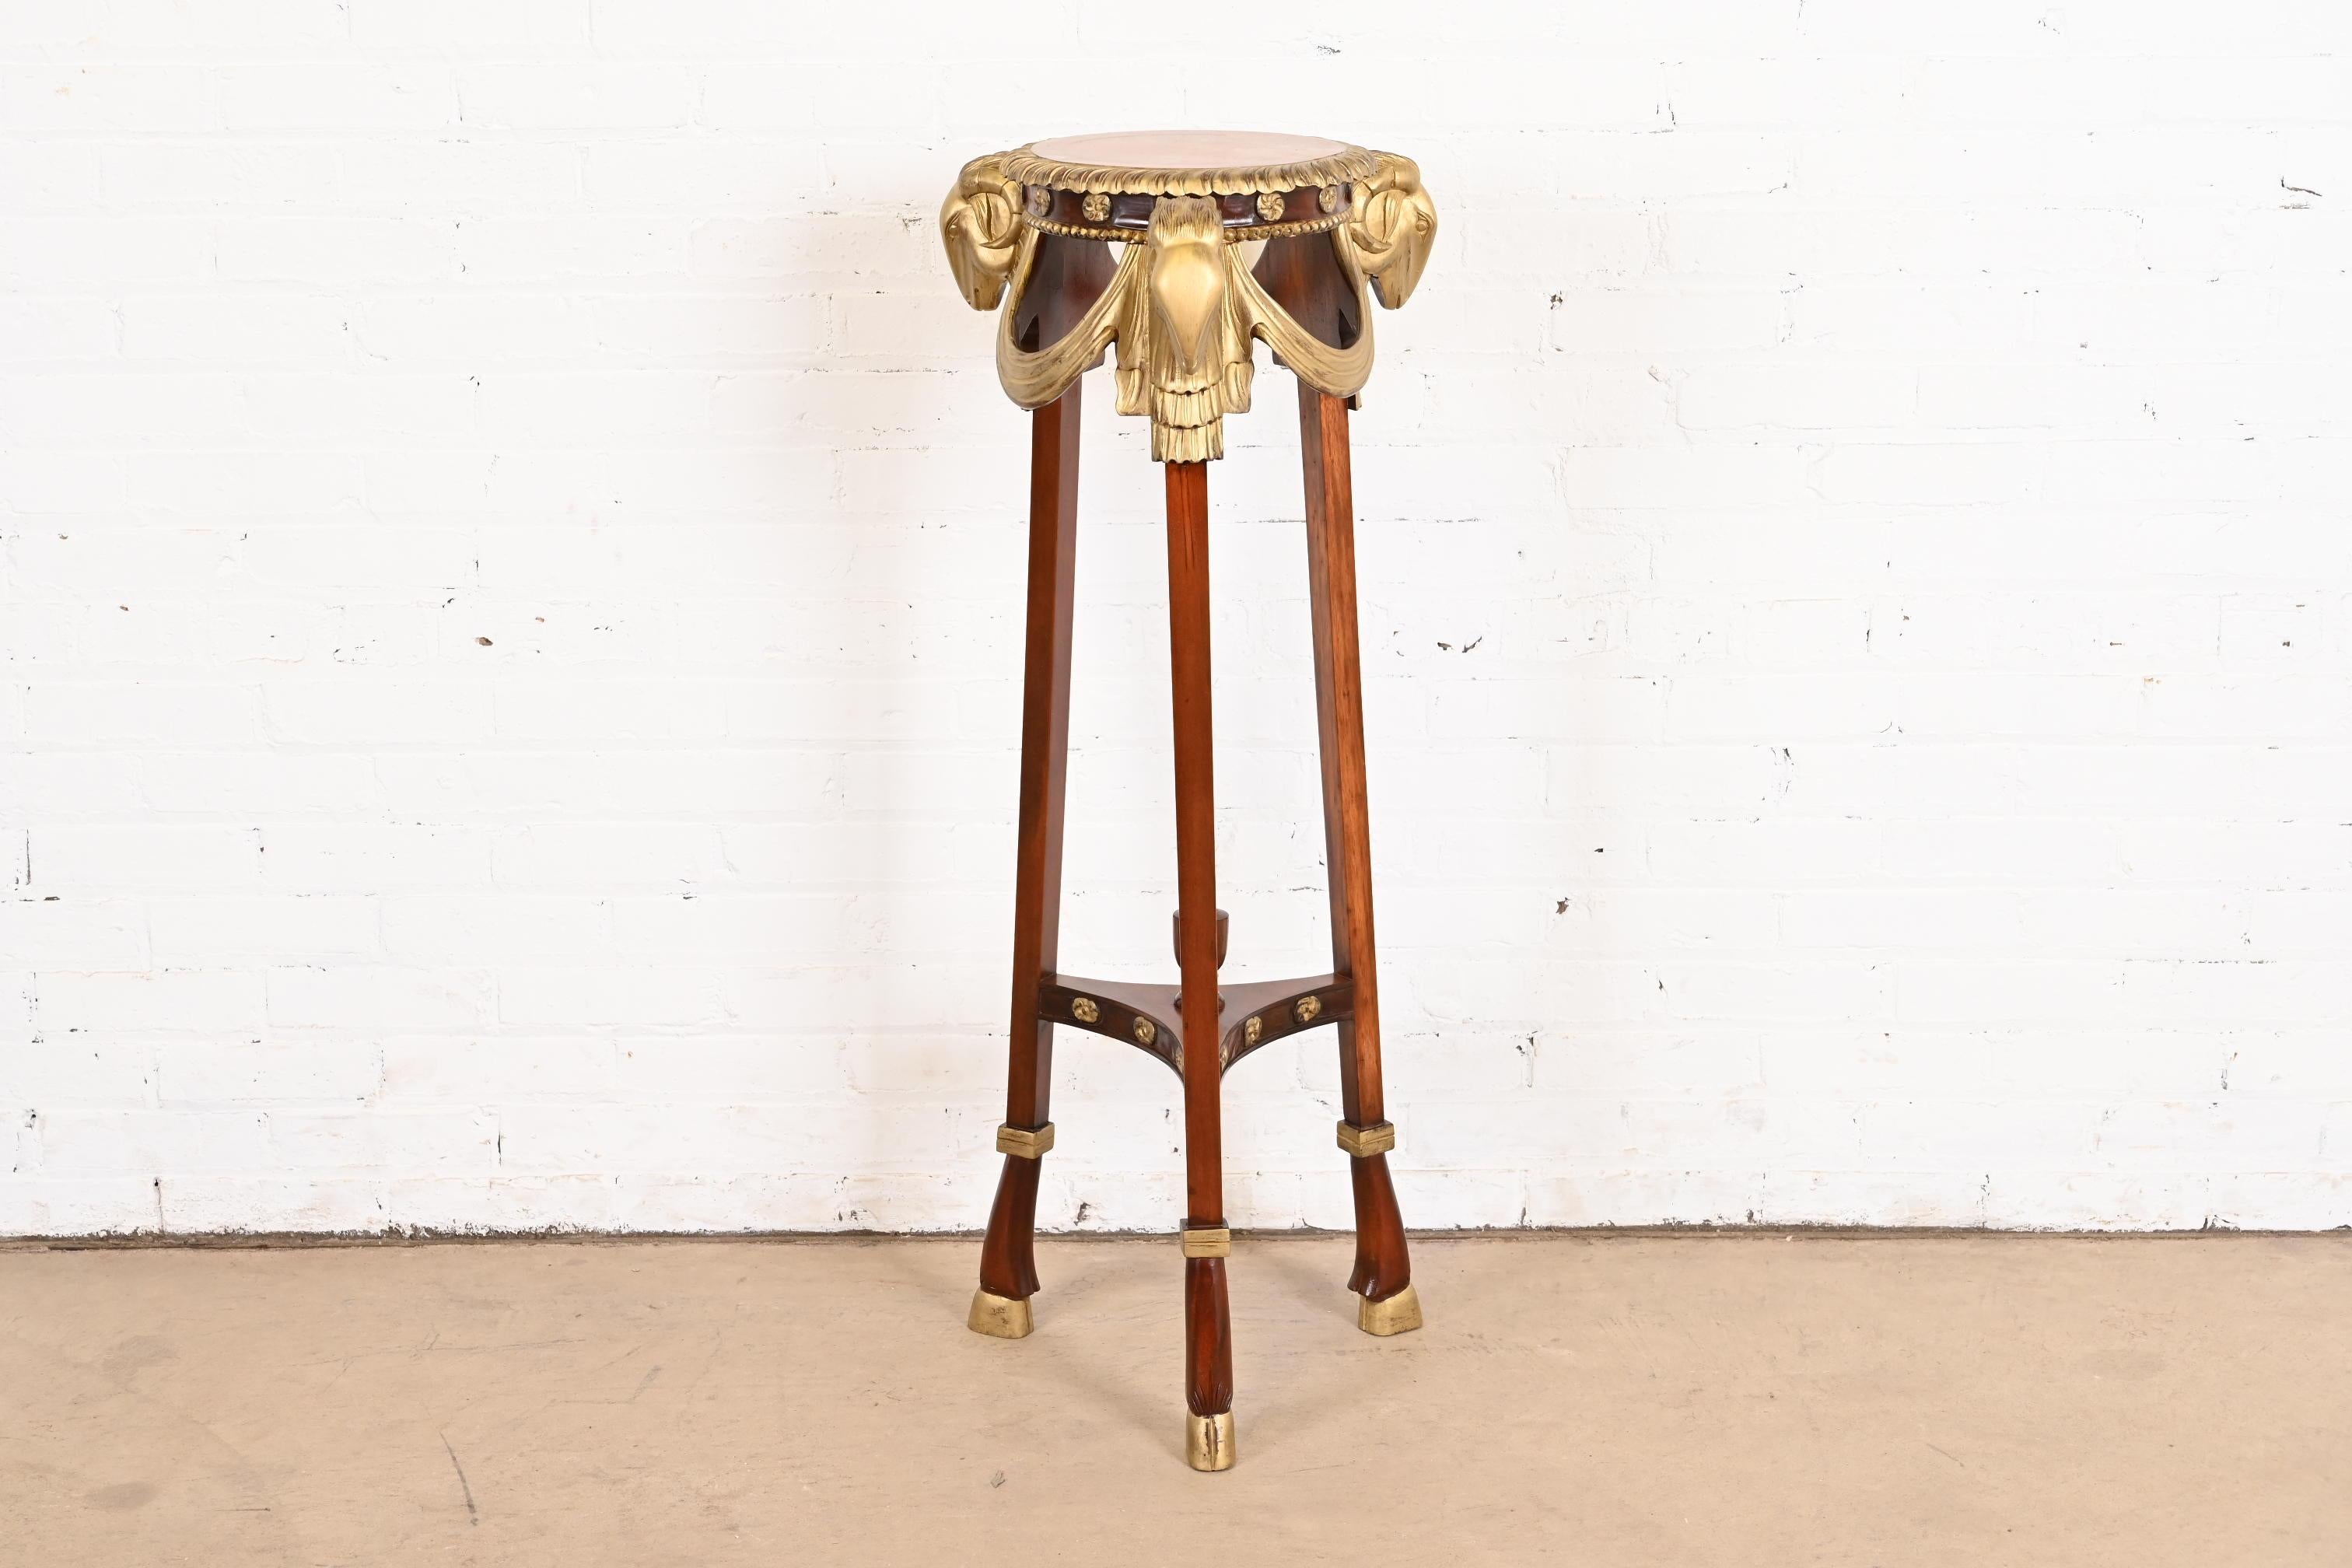 An exceptional ornate Regency or Neoclassical style guéridon, pedestal table, or plant stand

By John Widdicomb

USA, Circa 1980s

Gorgeous mahogany, with carved gilt wood swags and ram heads, and hooved feet.

Measures: 15